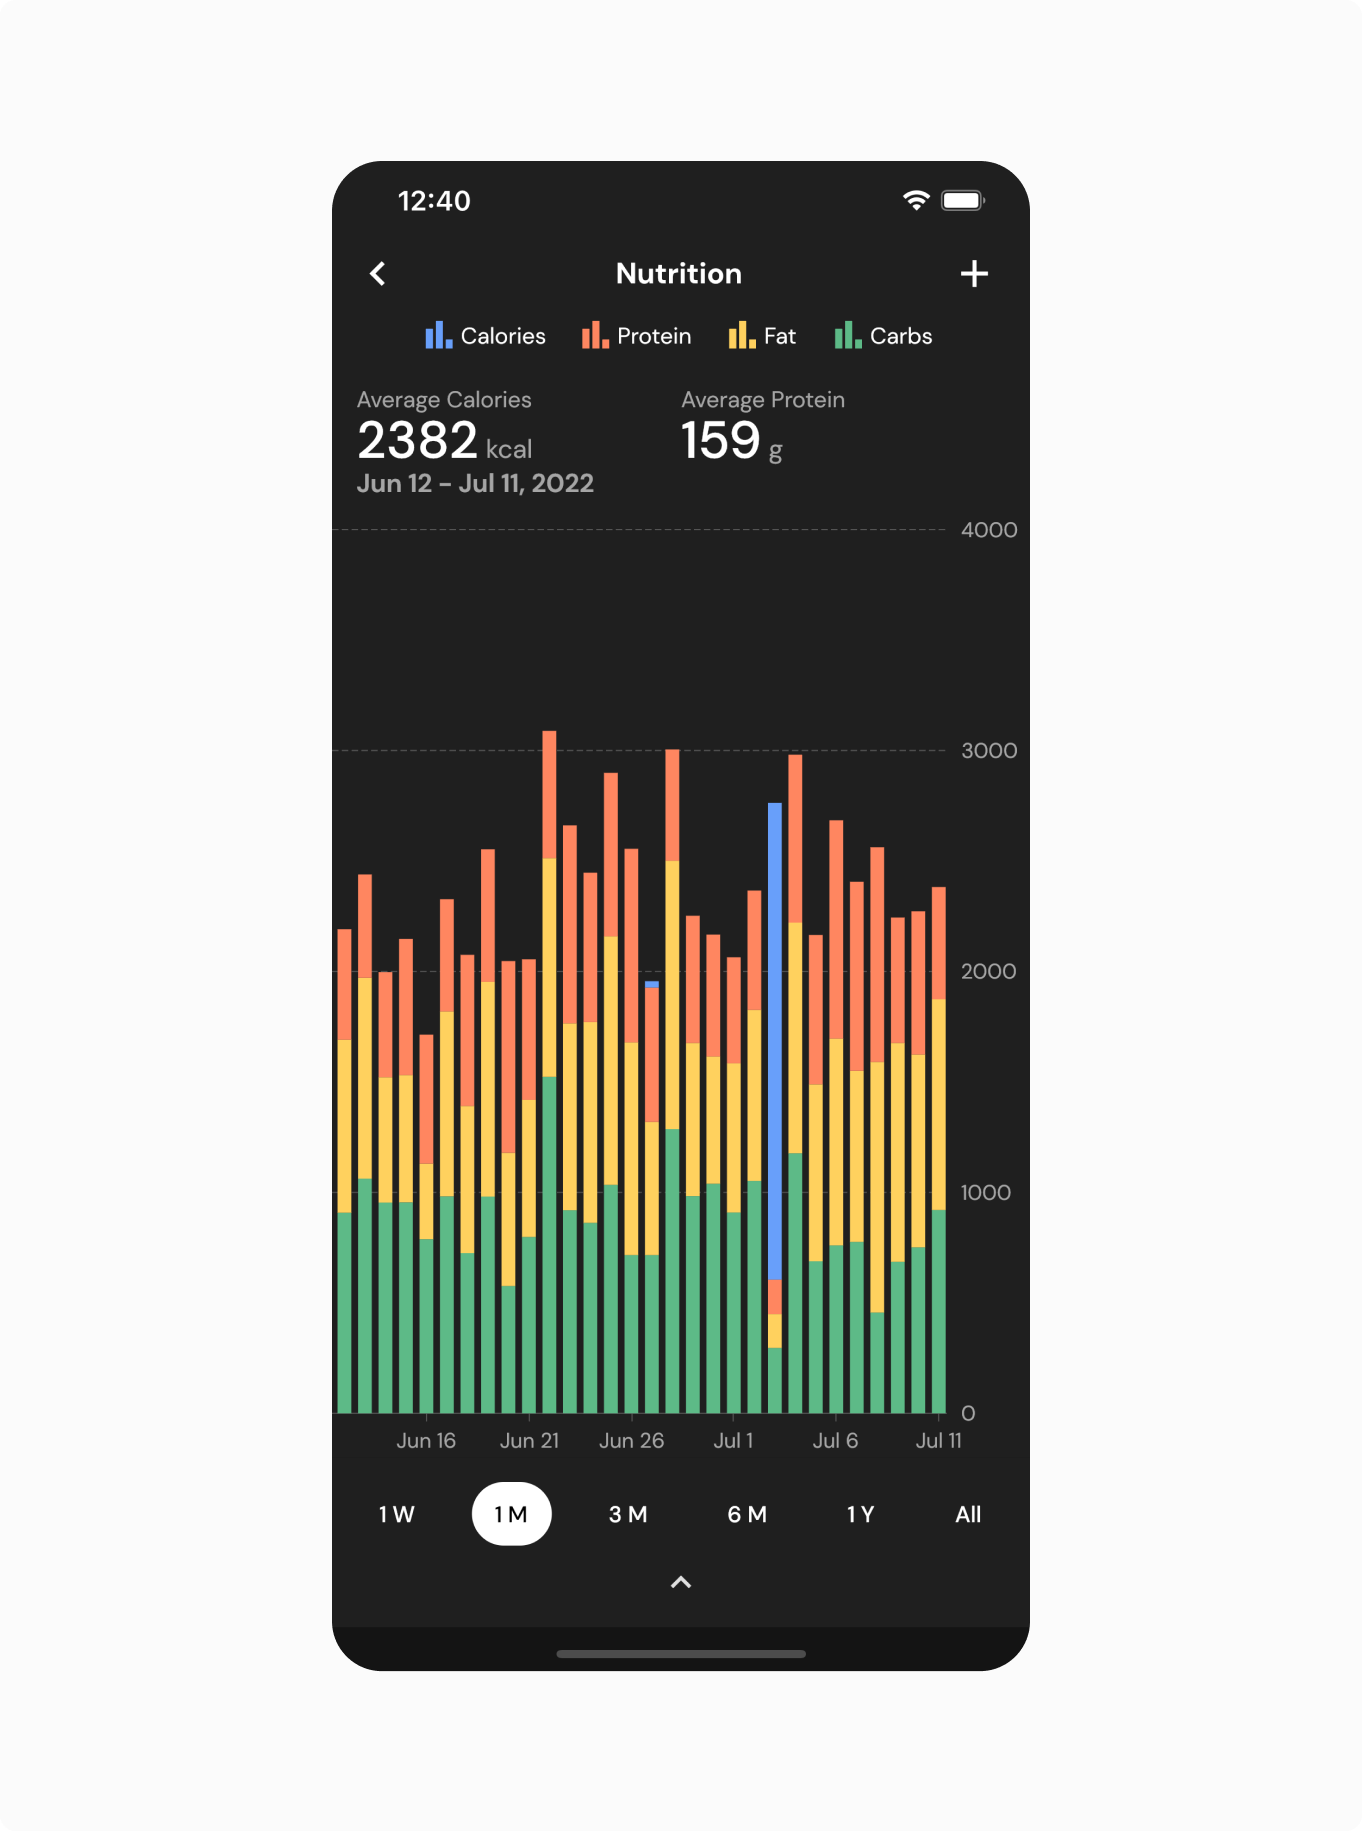 View your nutrition data over different time intervals